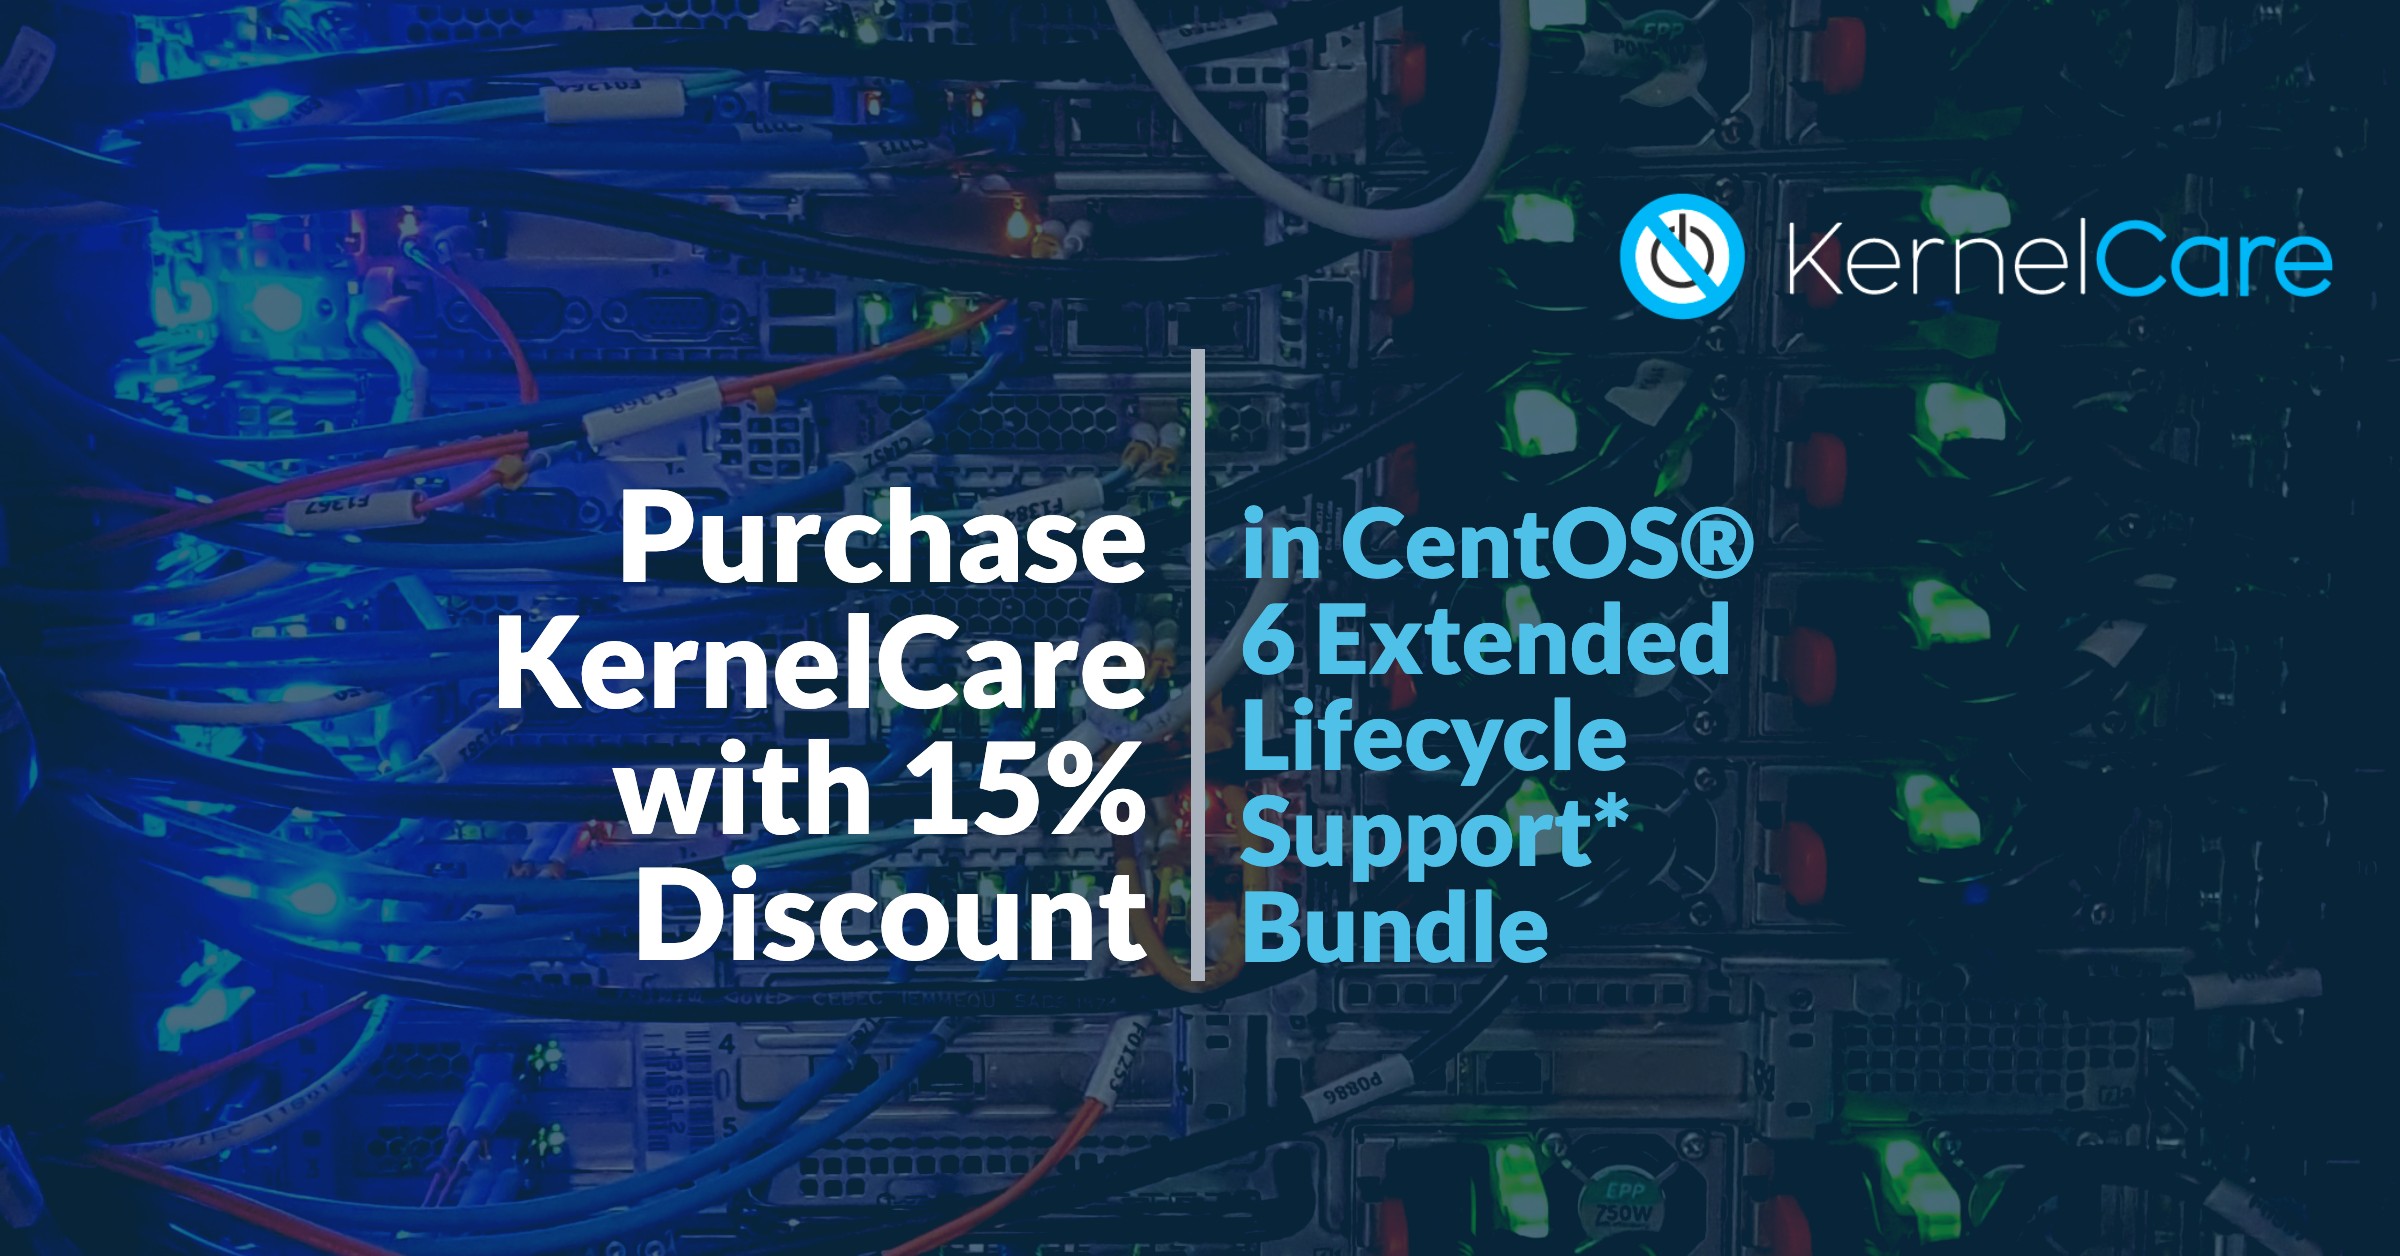 Purchase KernelCare with 15% Discount in CentOS® 6 Extended Lifecycle Support_ Bundle